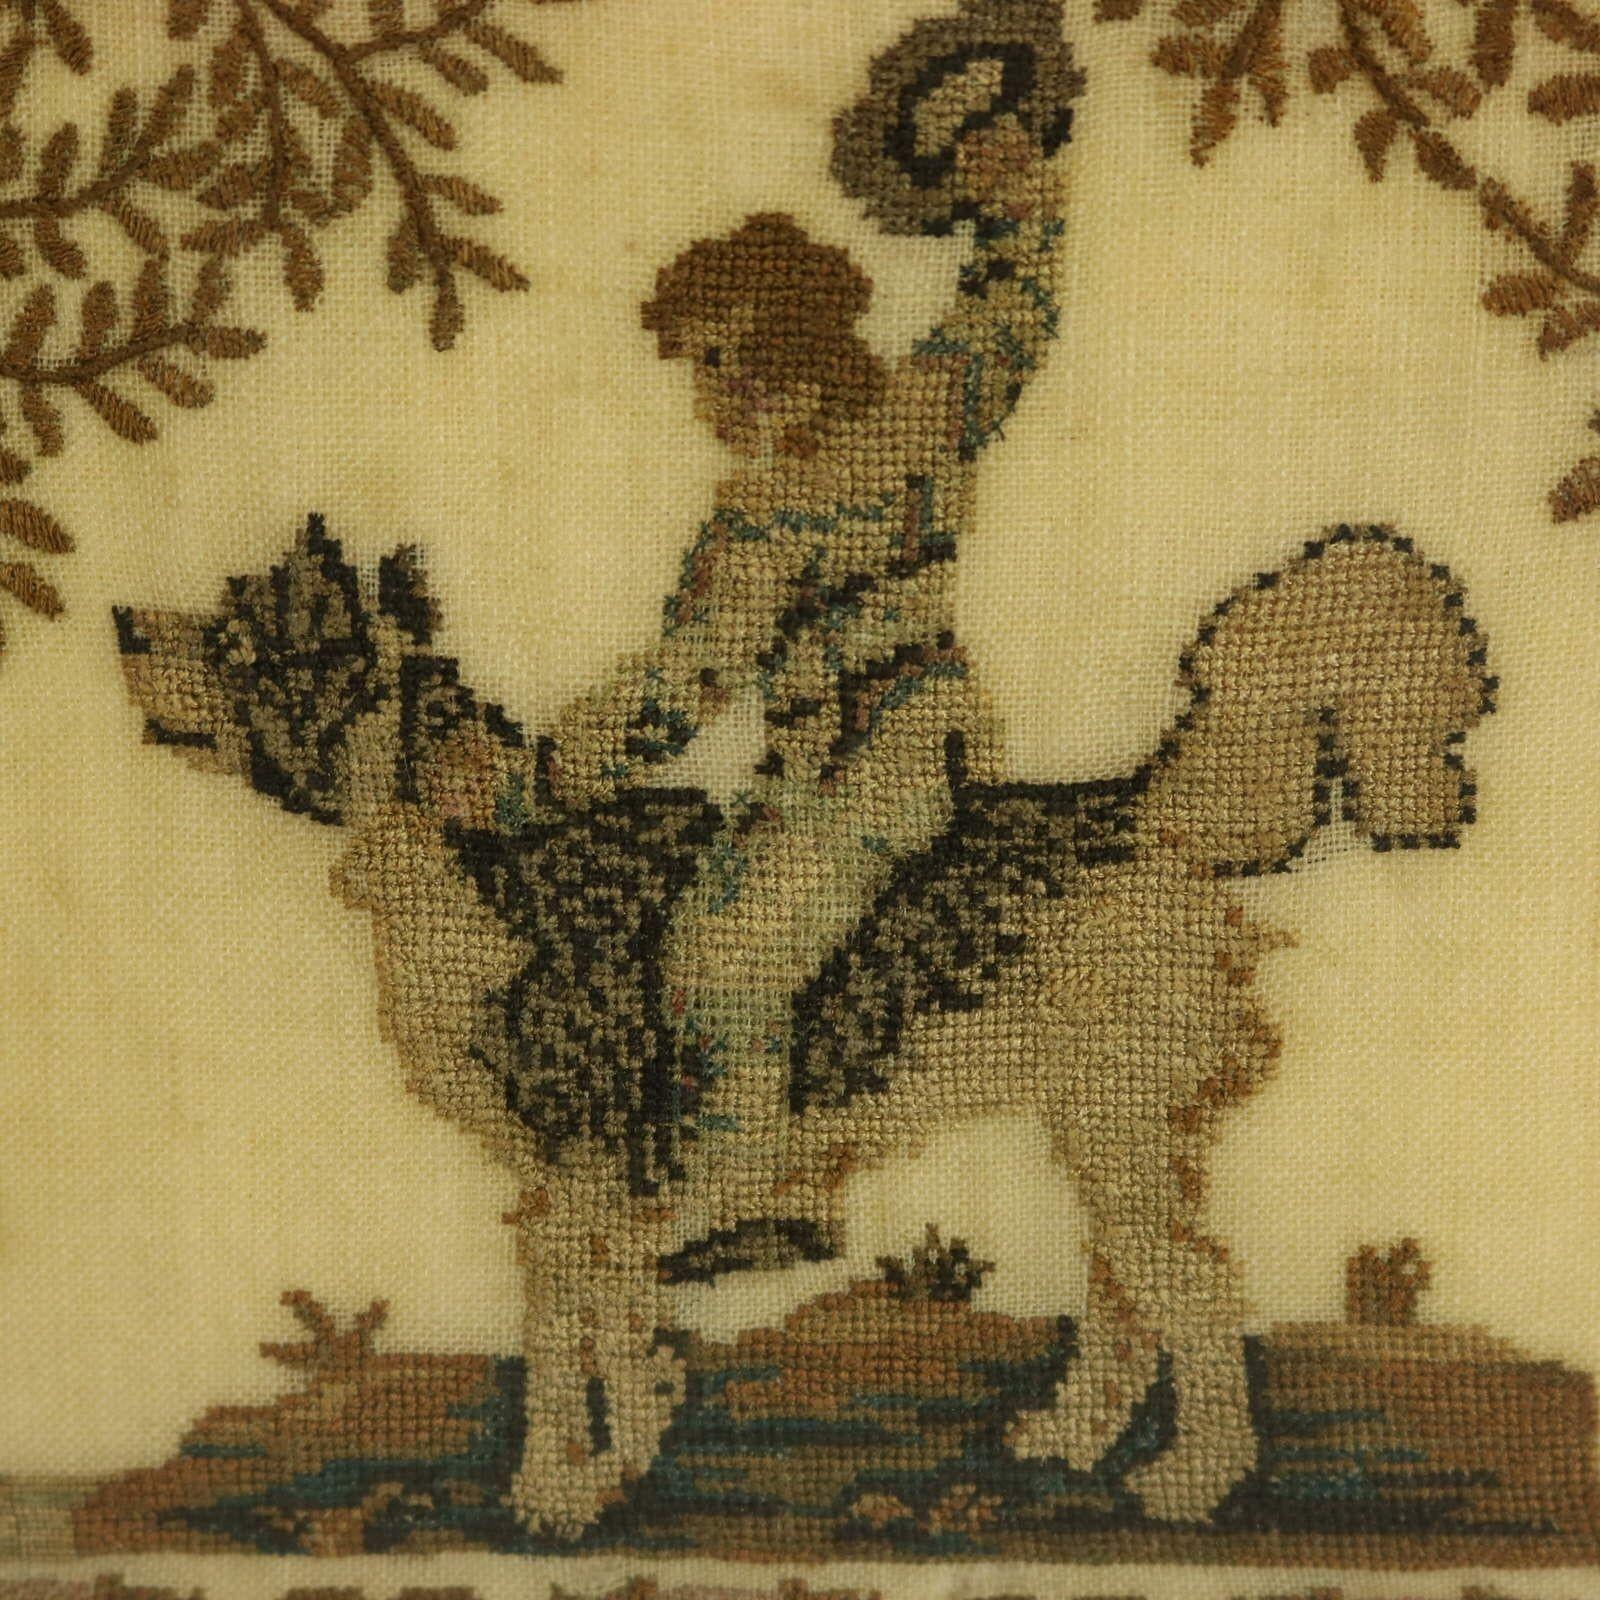 Antique Sampler, 1824, by Mary Richards aged 13 1